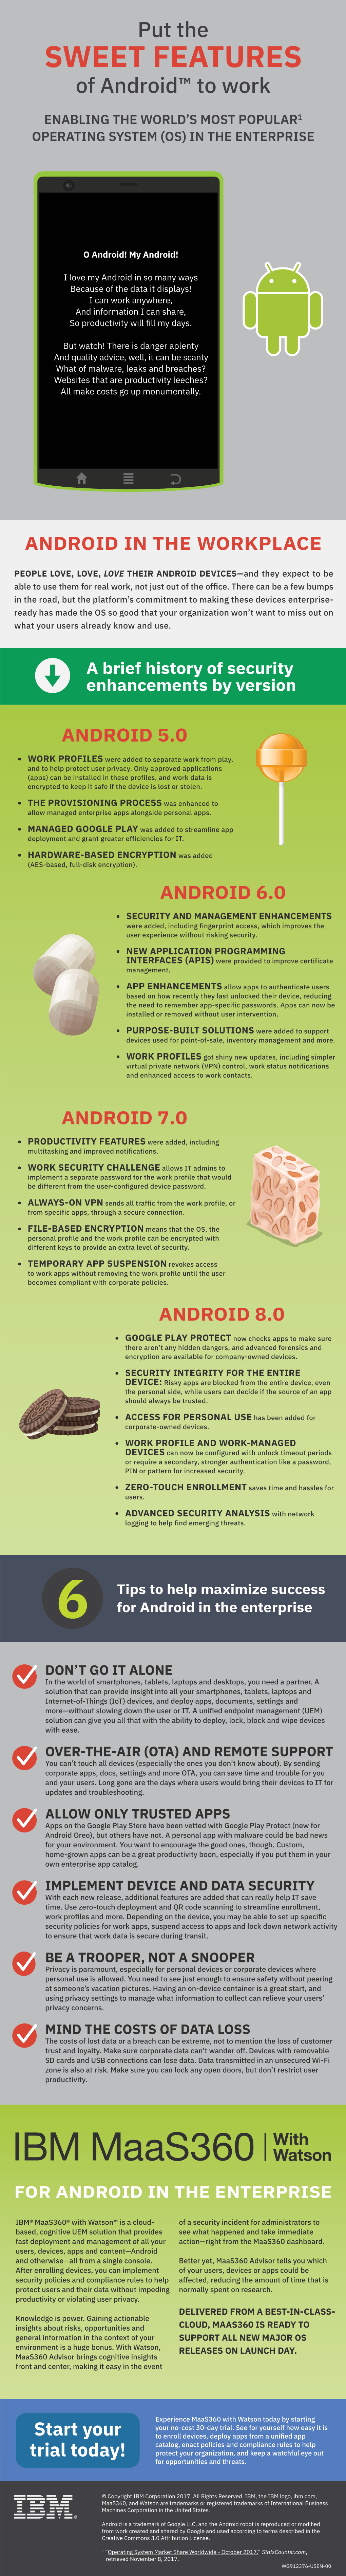 SWEET FEATURES of Android™ to Work